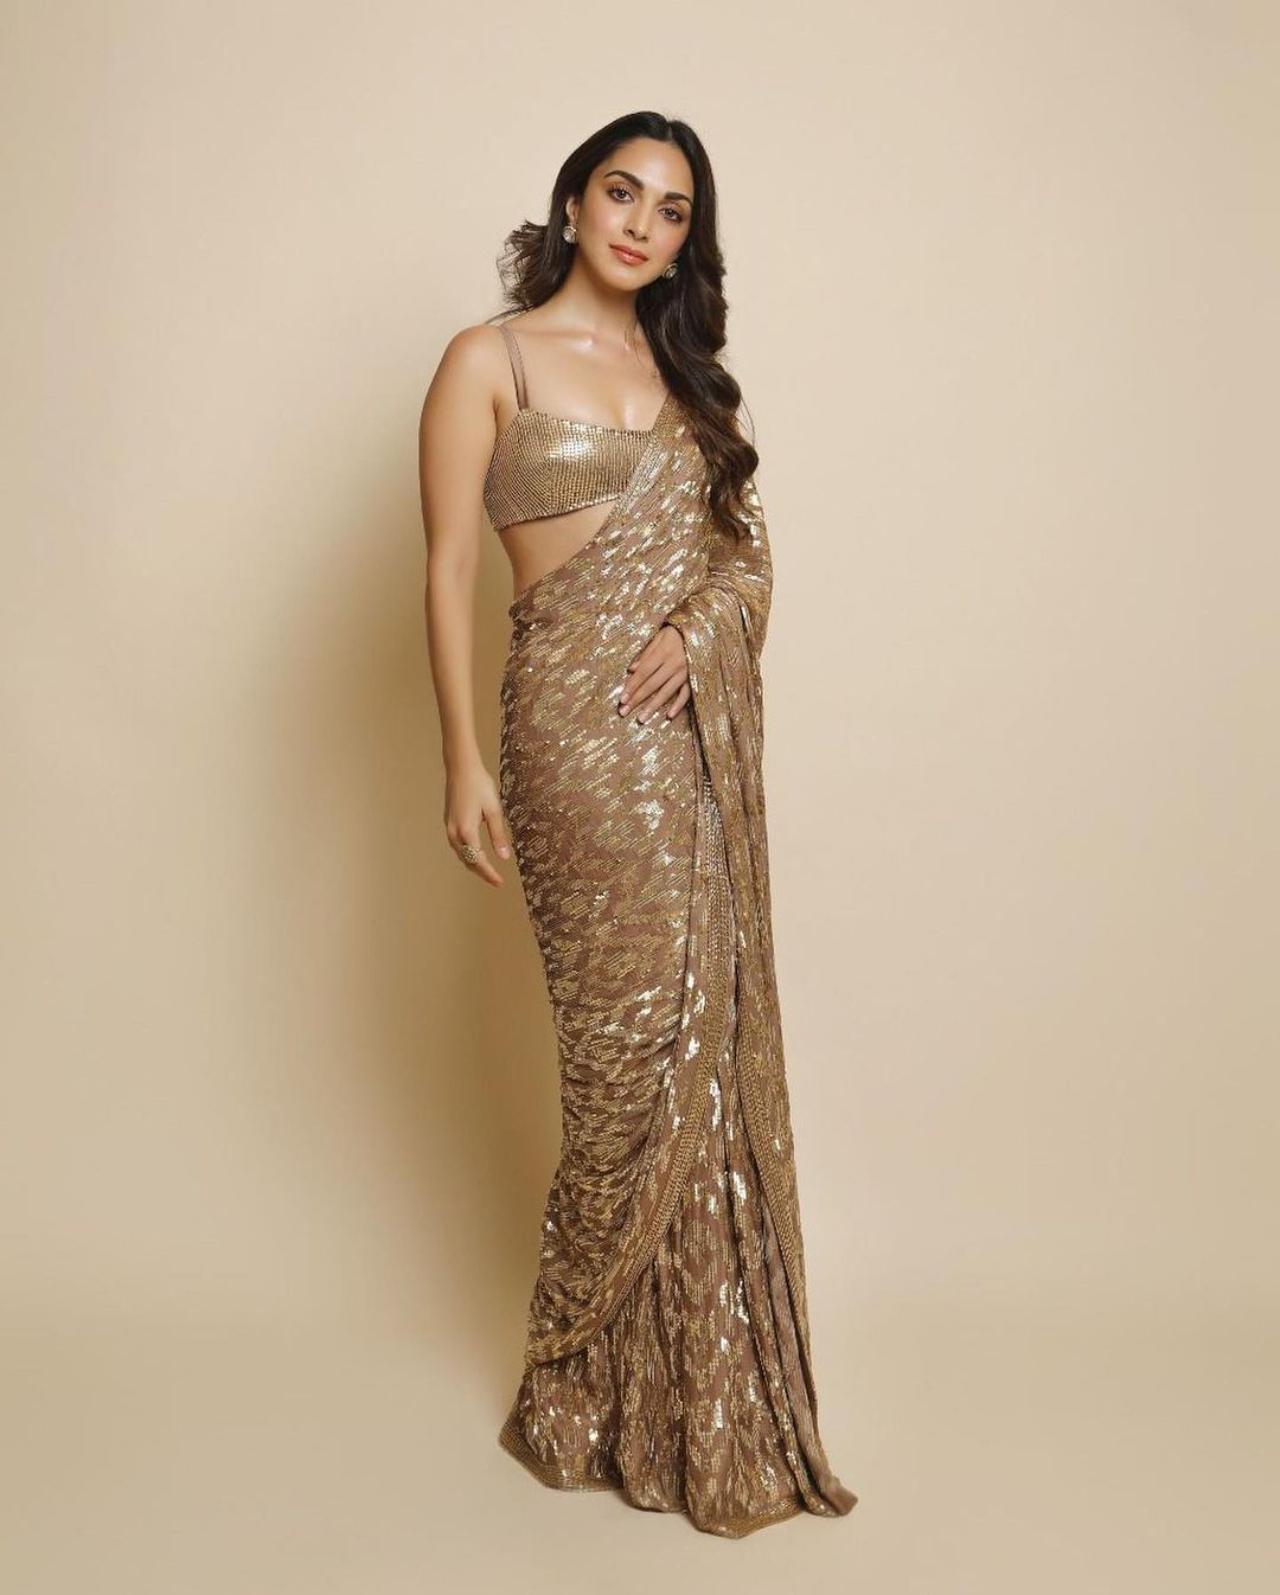 Kiara Advani looks stunning in this bronze gold mettalic saree. She completed the look with glossy make-up and round earrings